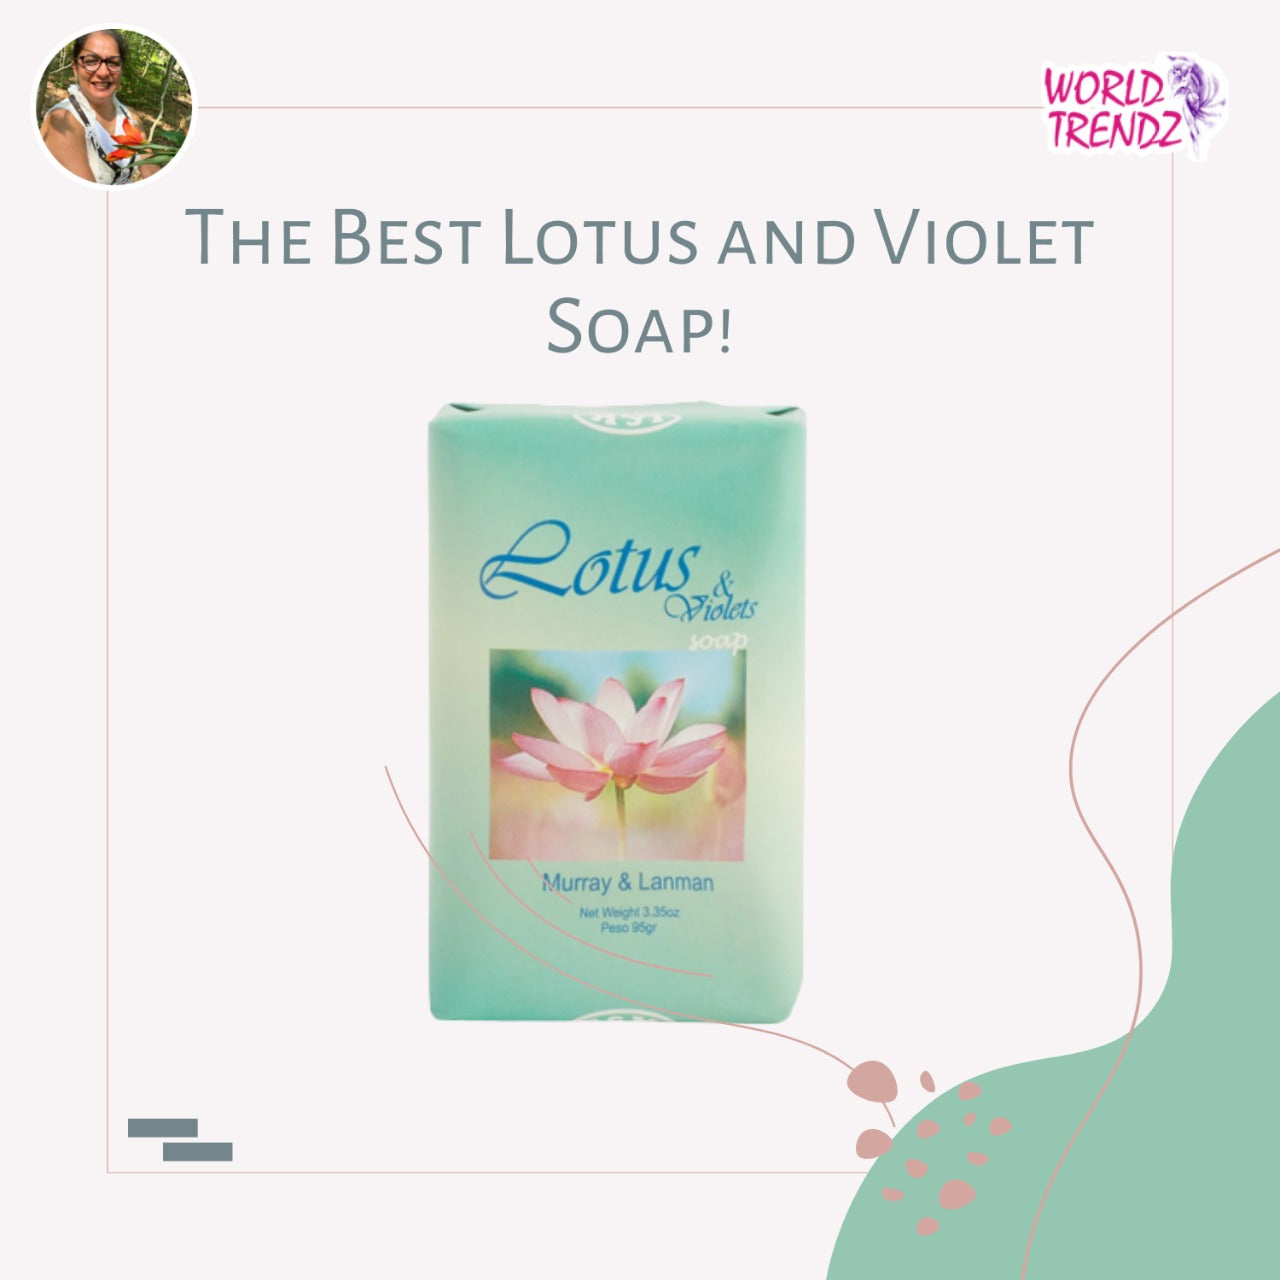 Lotus and Violet Soap 3.3 oz